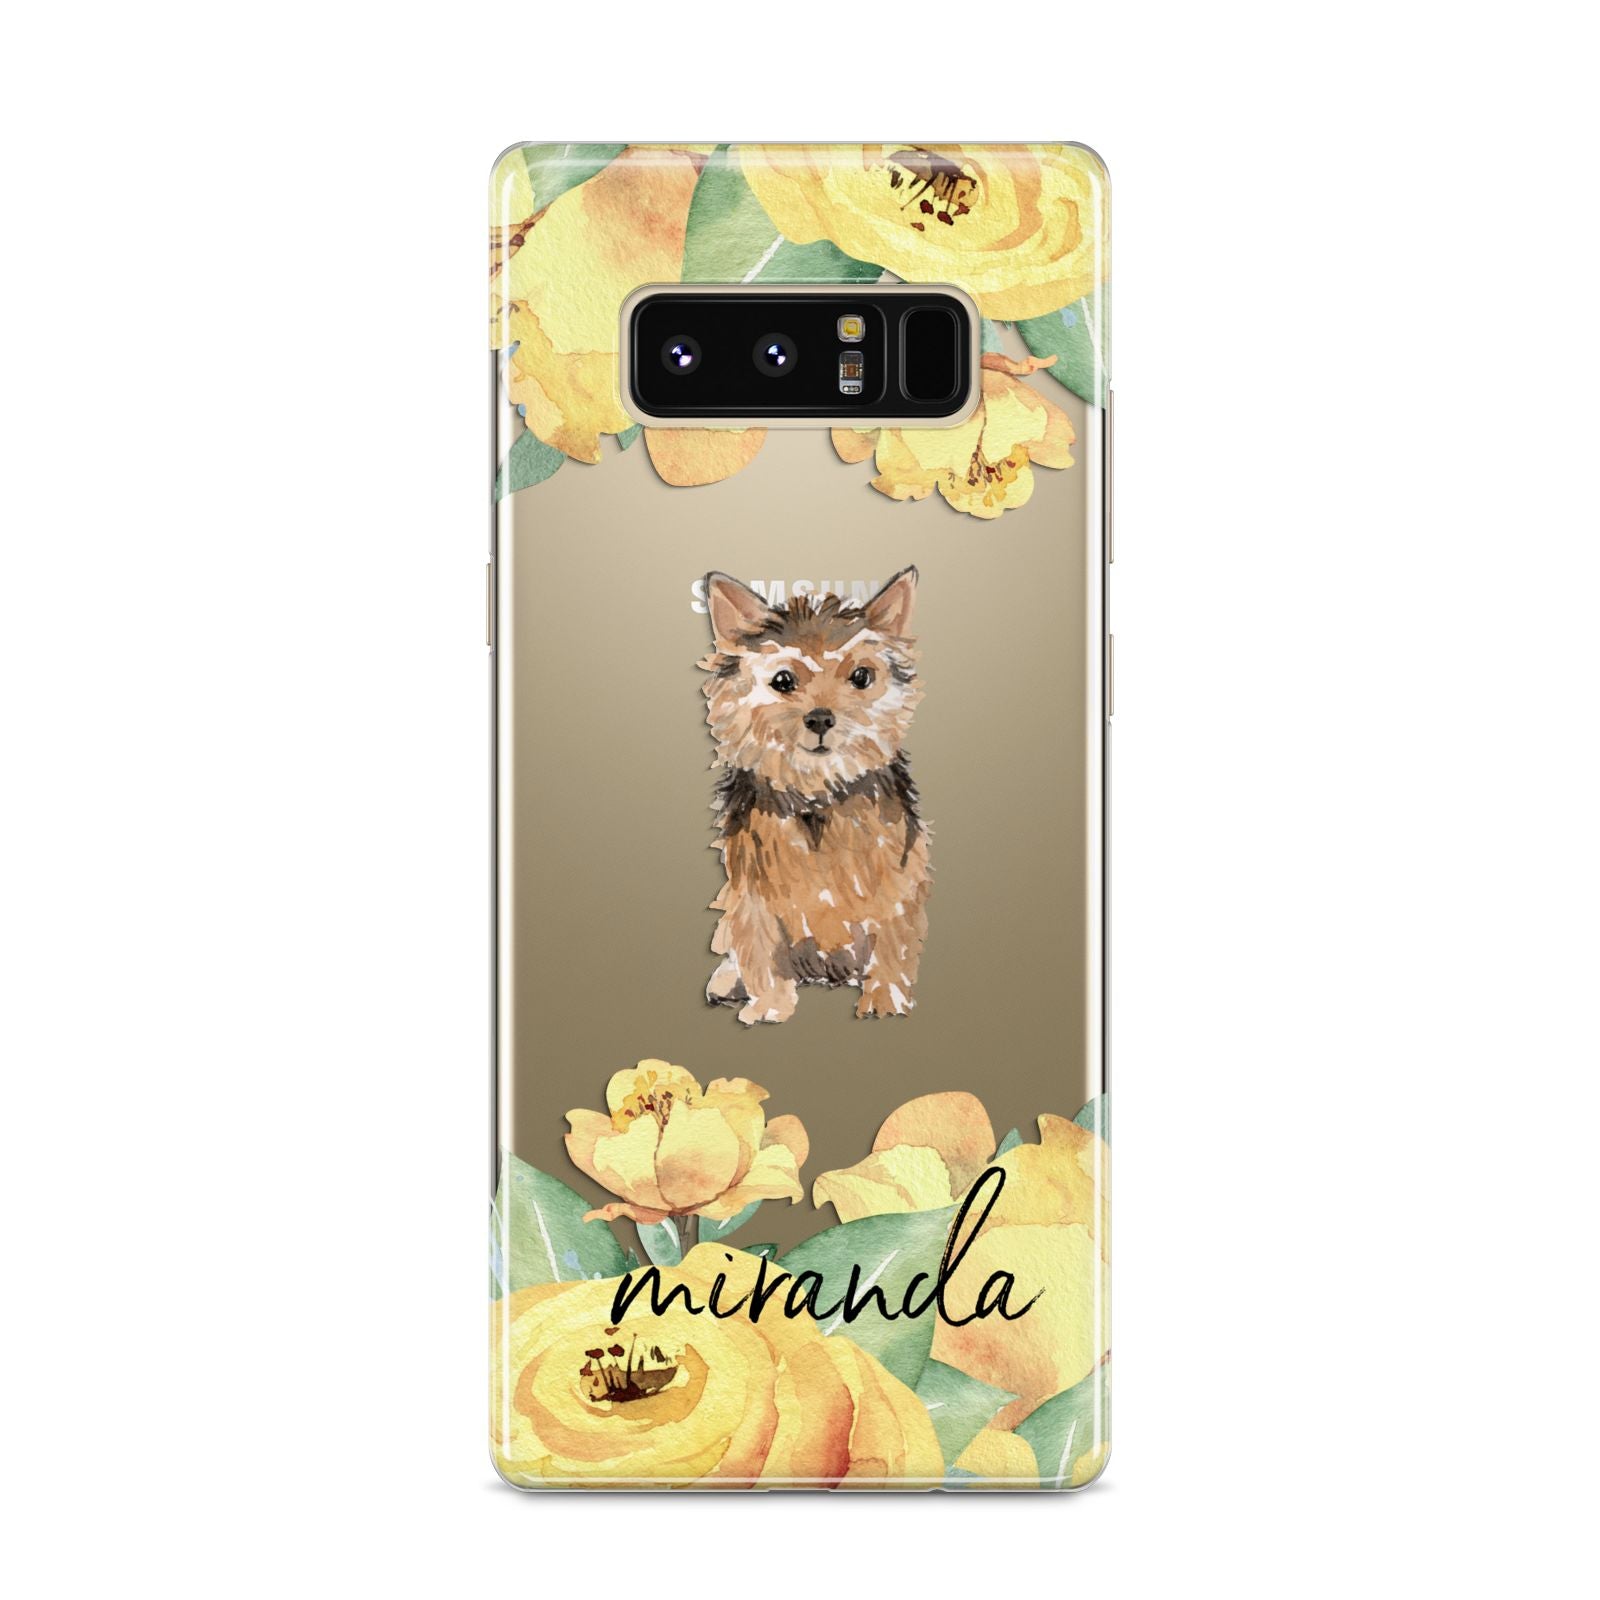 Personalised Norwich Terrier Samsung Galaxy S8 Case